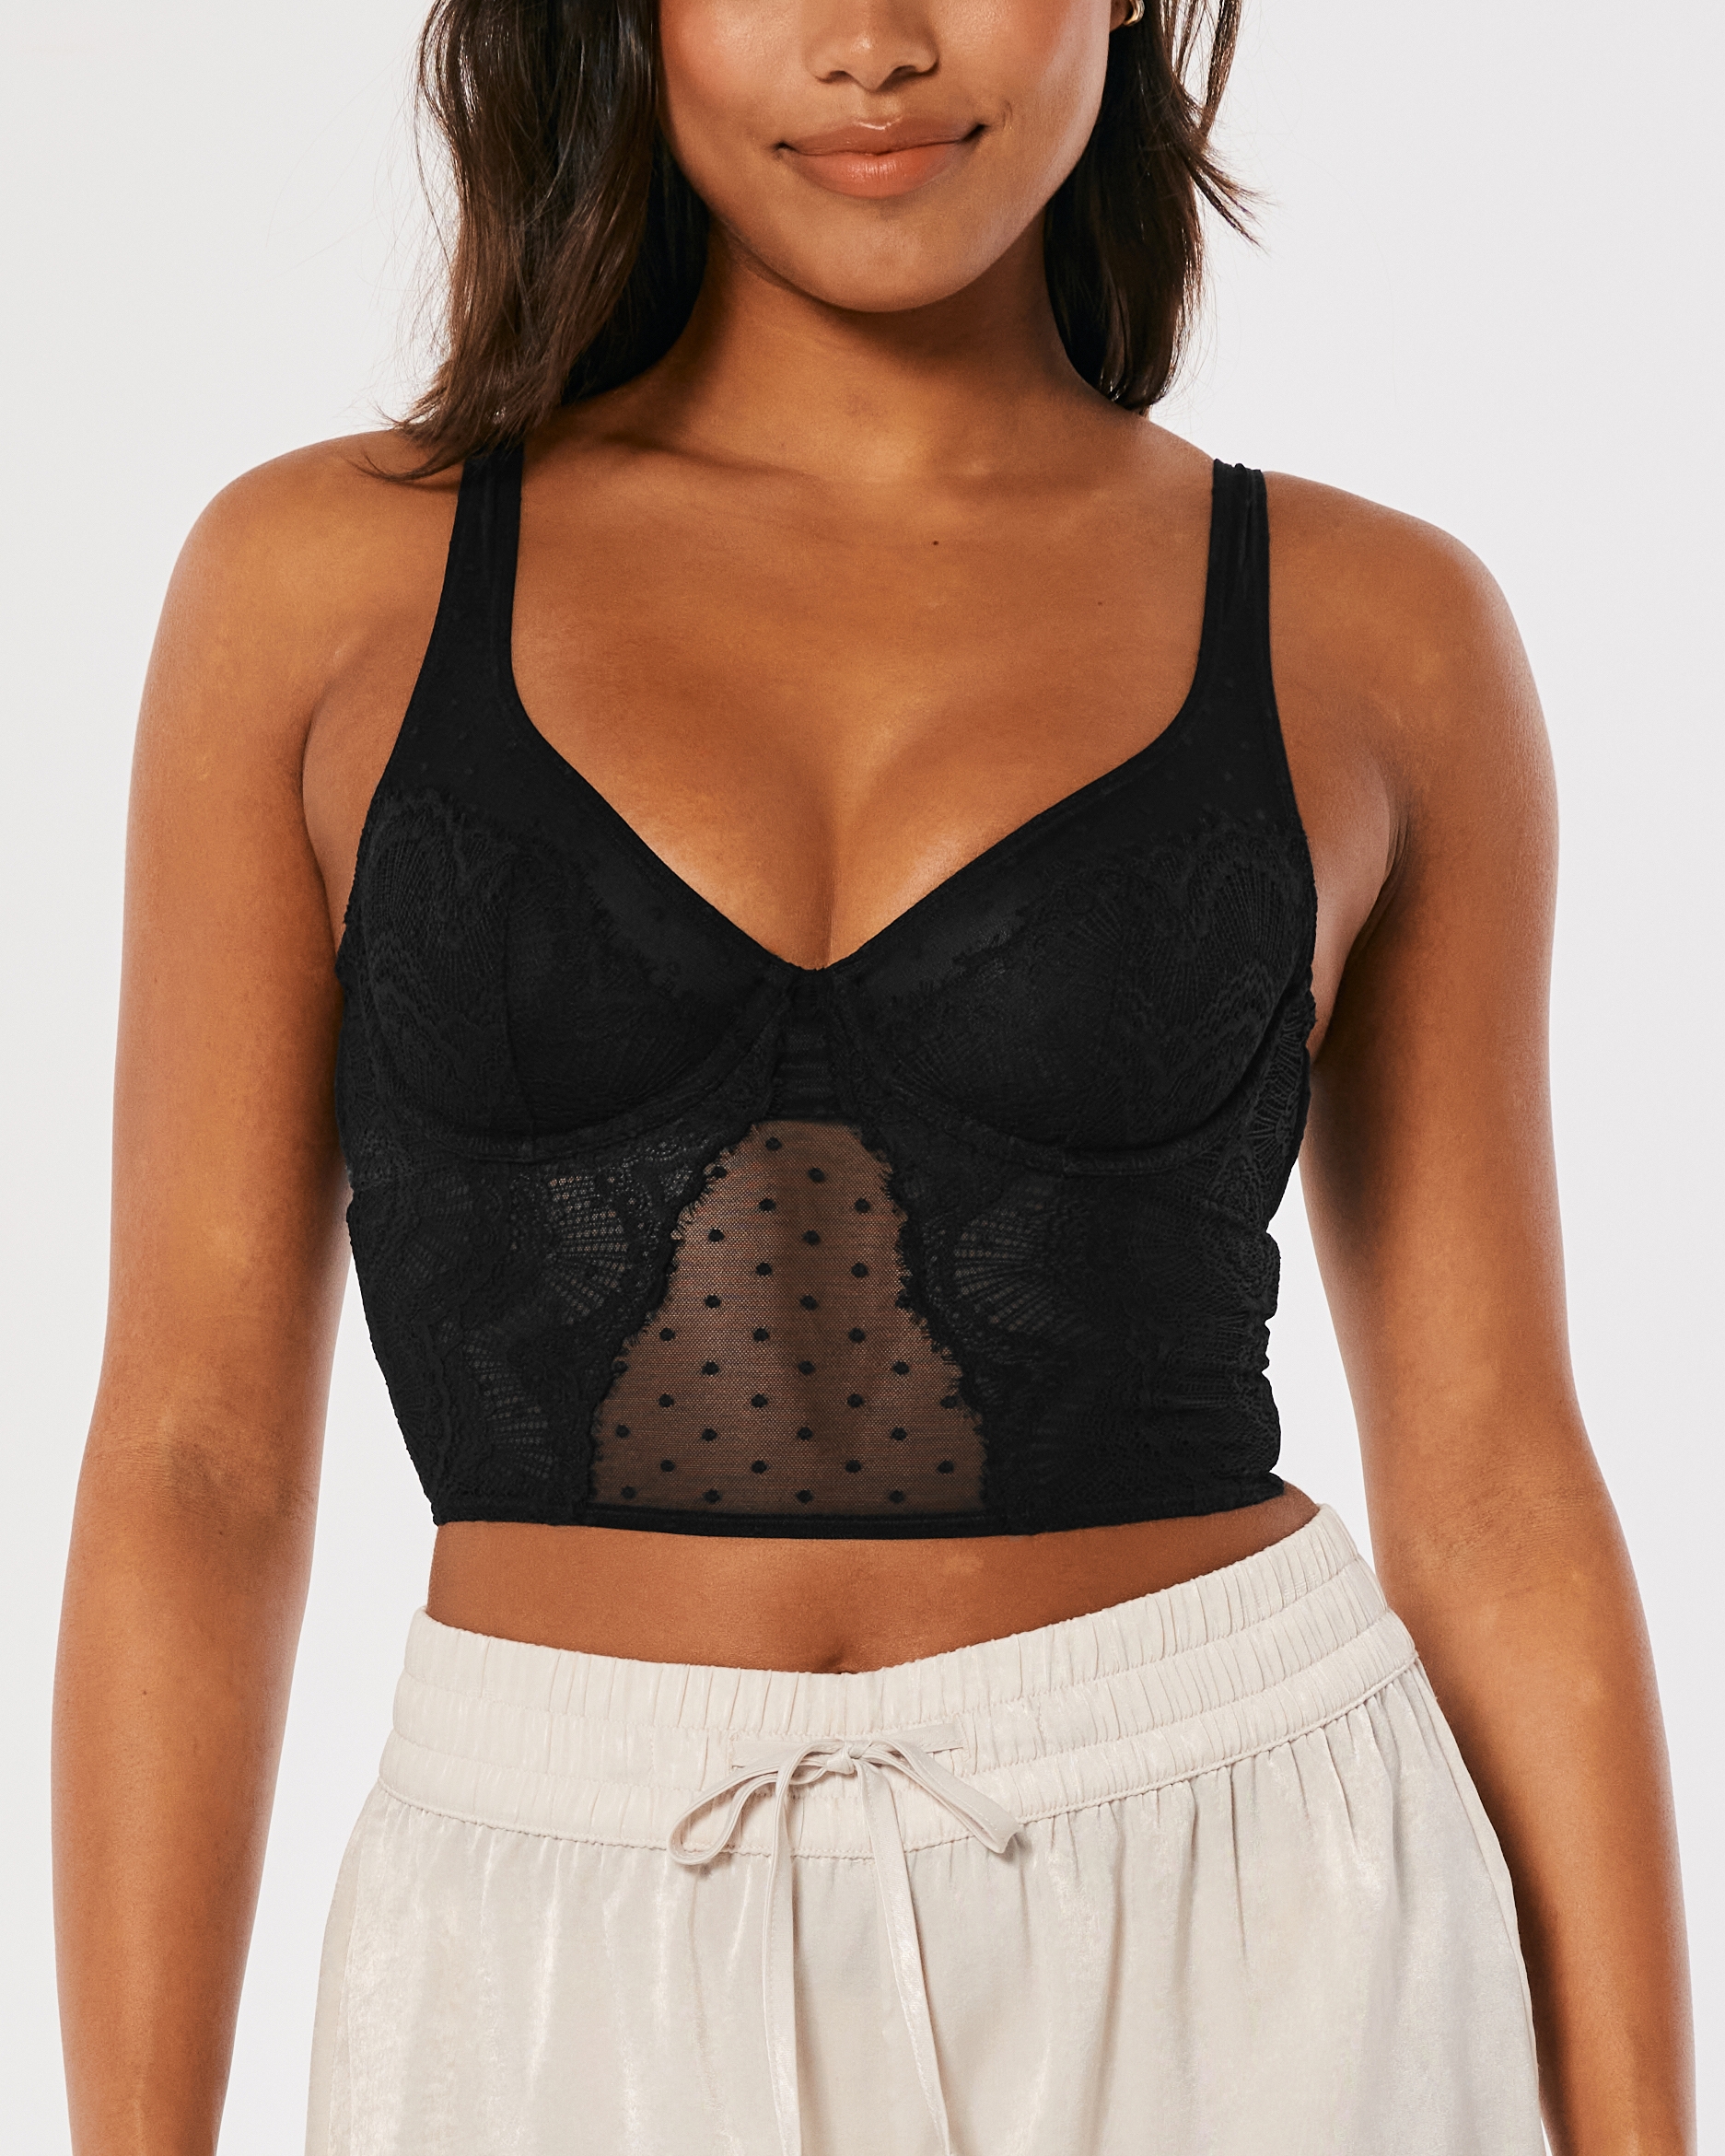 Hollister Gilly Hicks Lace Bralette size medium - $15 - From Ava